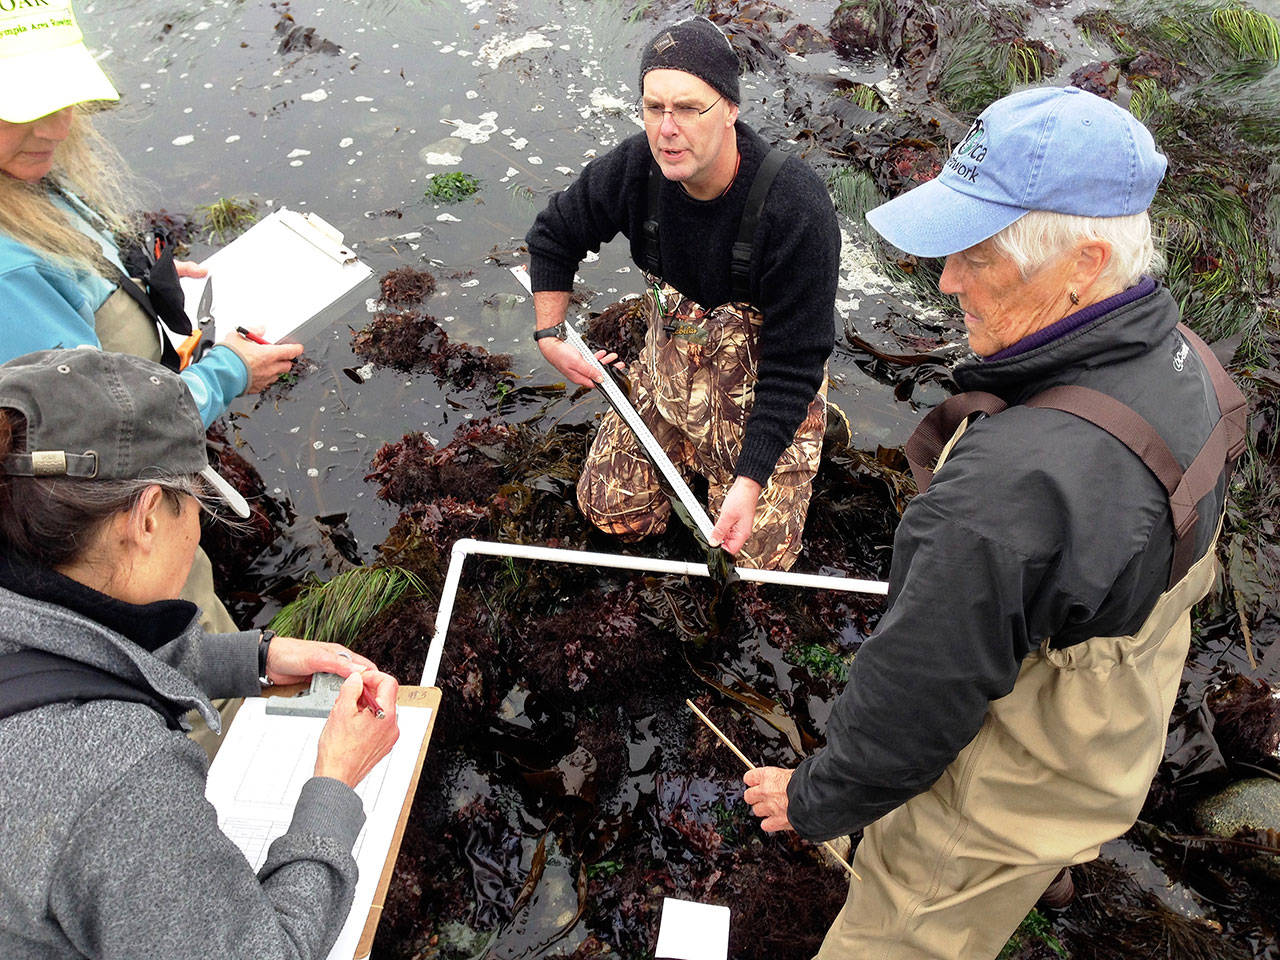 Rick Baker photo — Volunteers measure the length of different kelp species to see how fast they are growing. The volunteers measure the kelp harvesters are interested in.